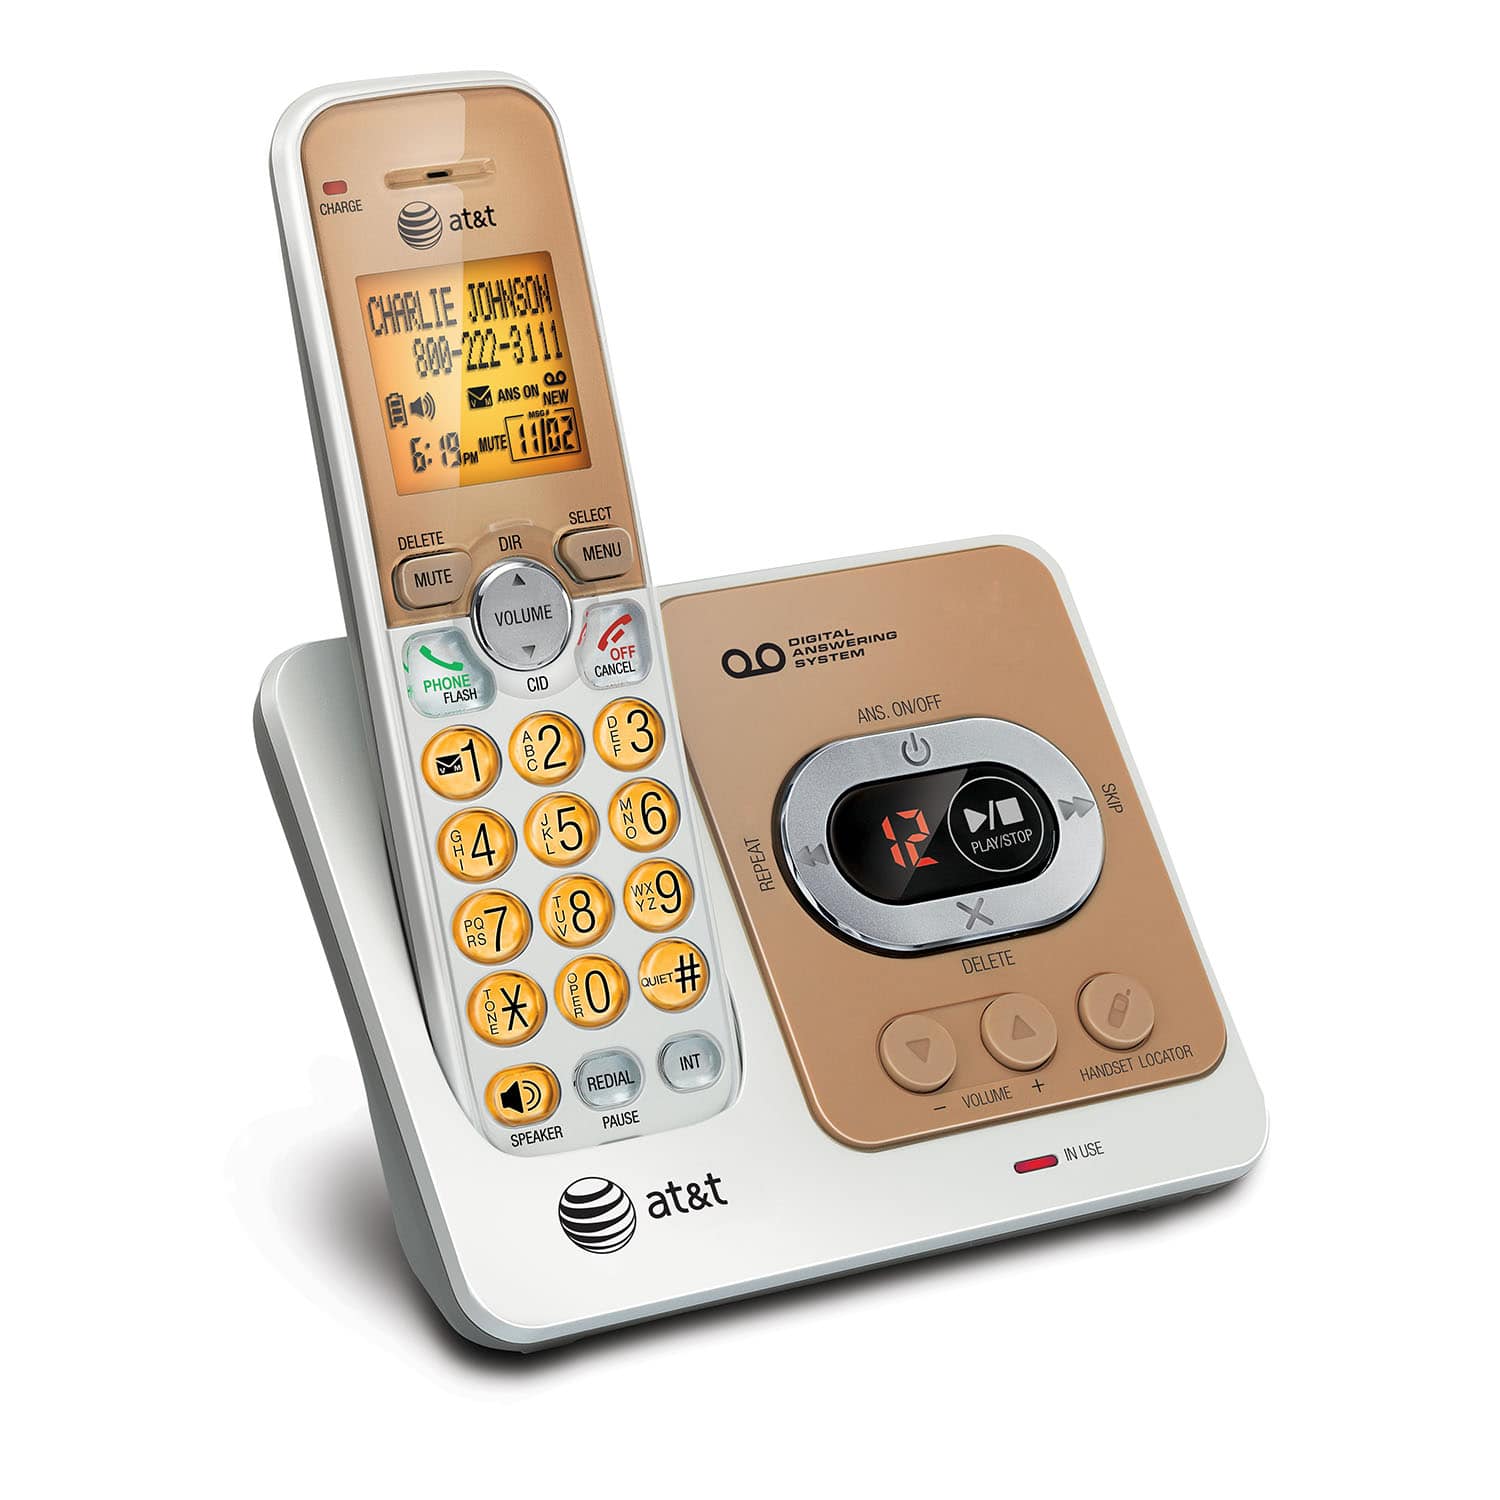 3 handset cordless answering system with caller ID/call waiting - view 3